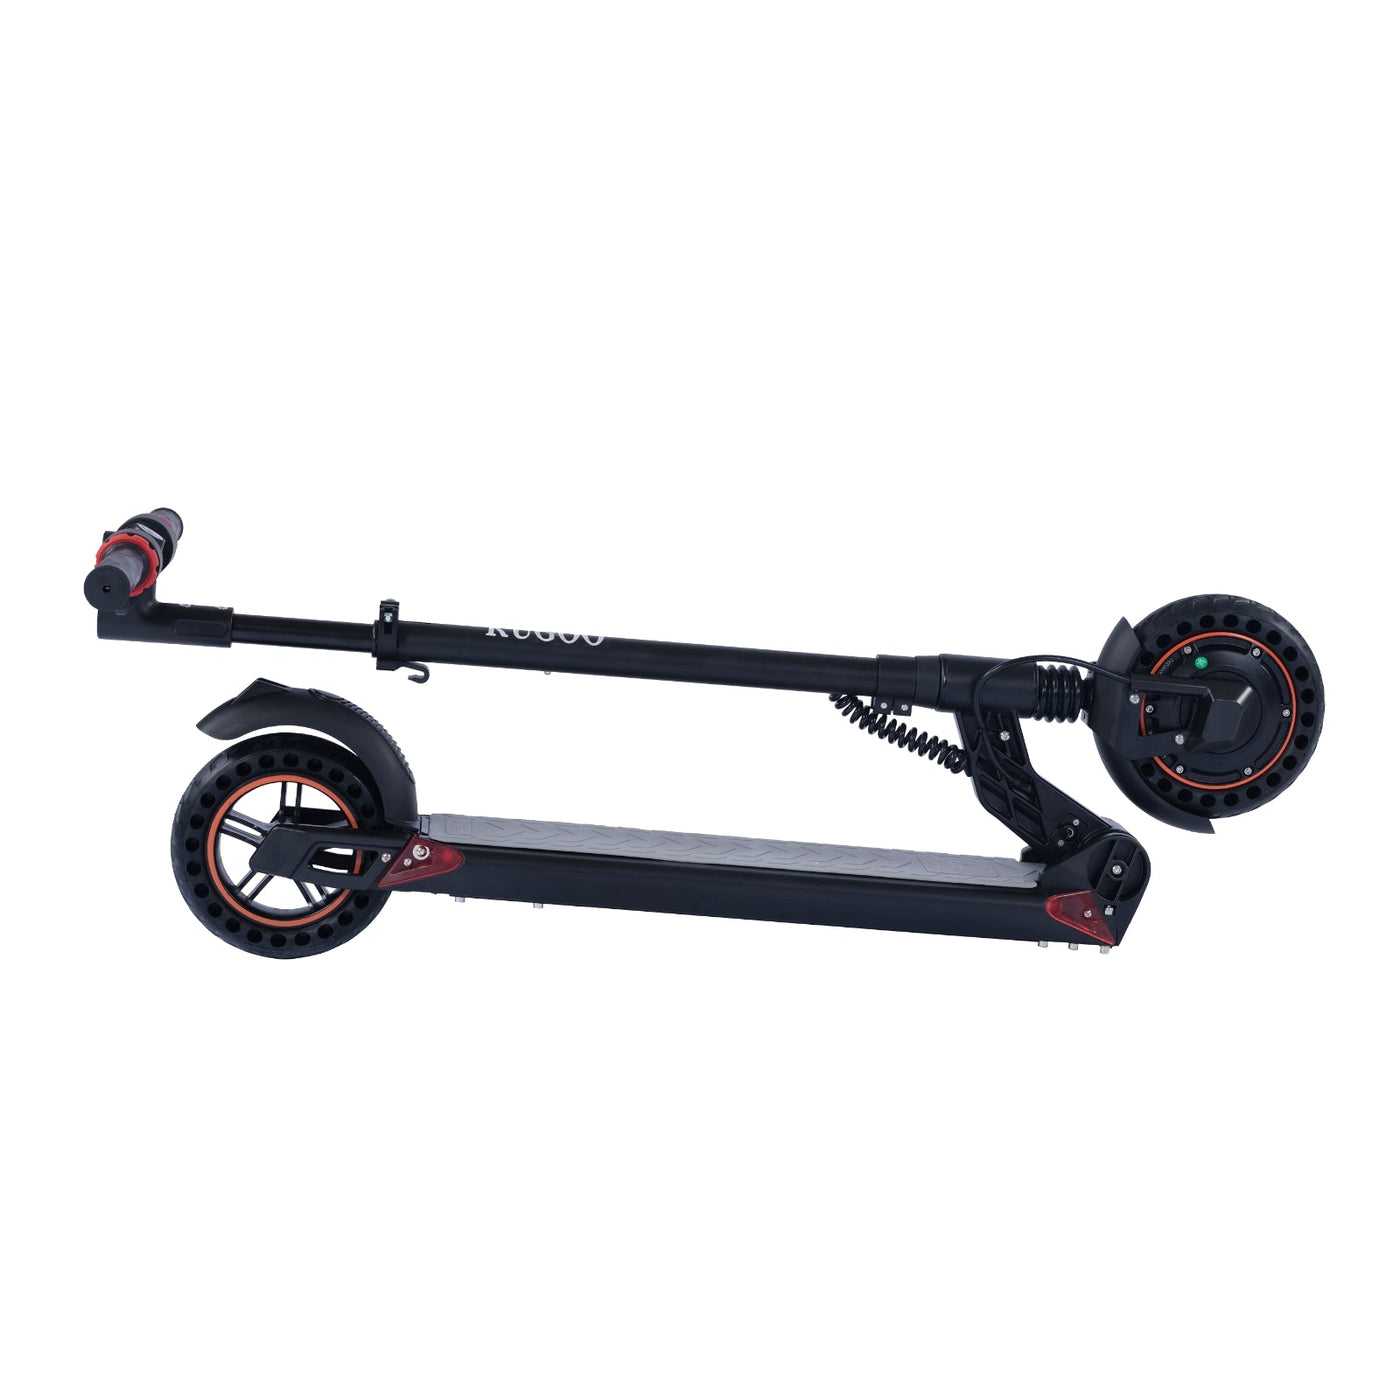 KUGOO S1 PLUS ELECTRIC SCOOTER